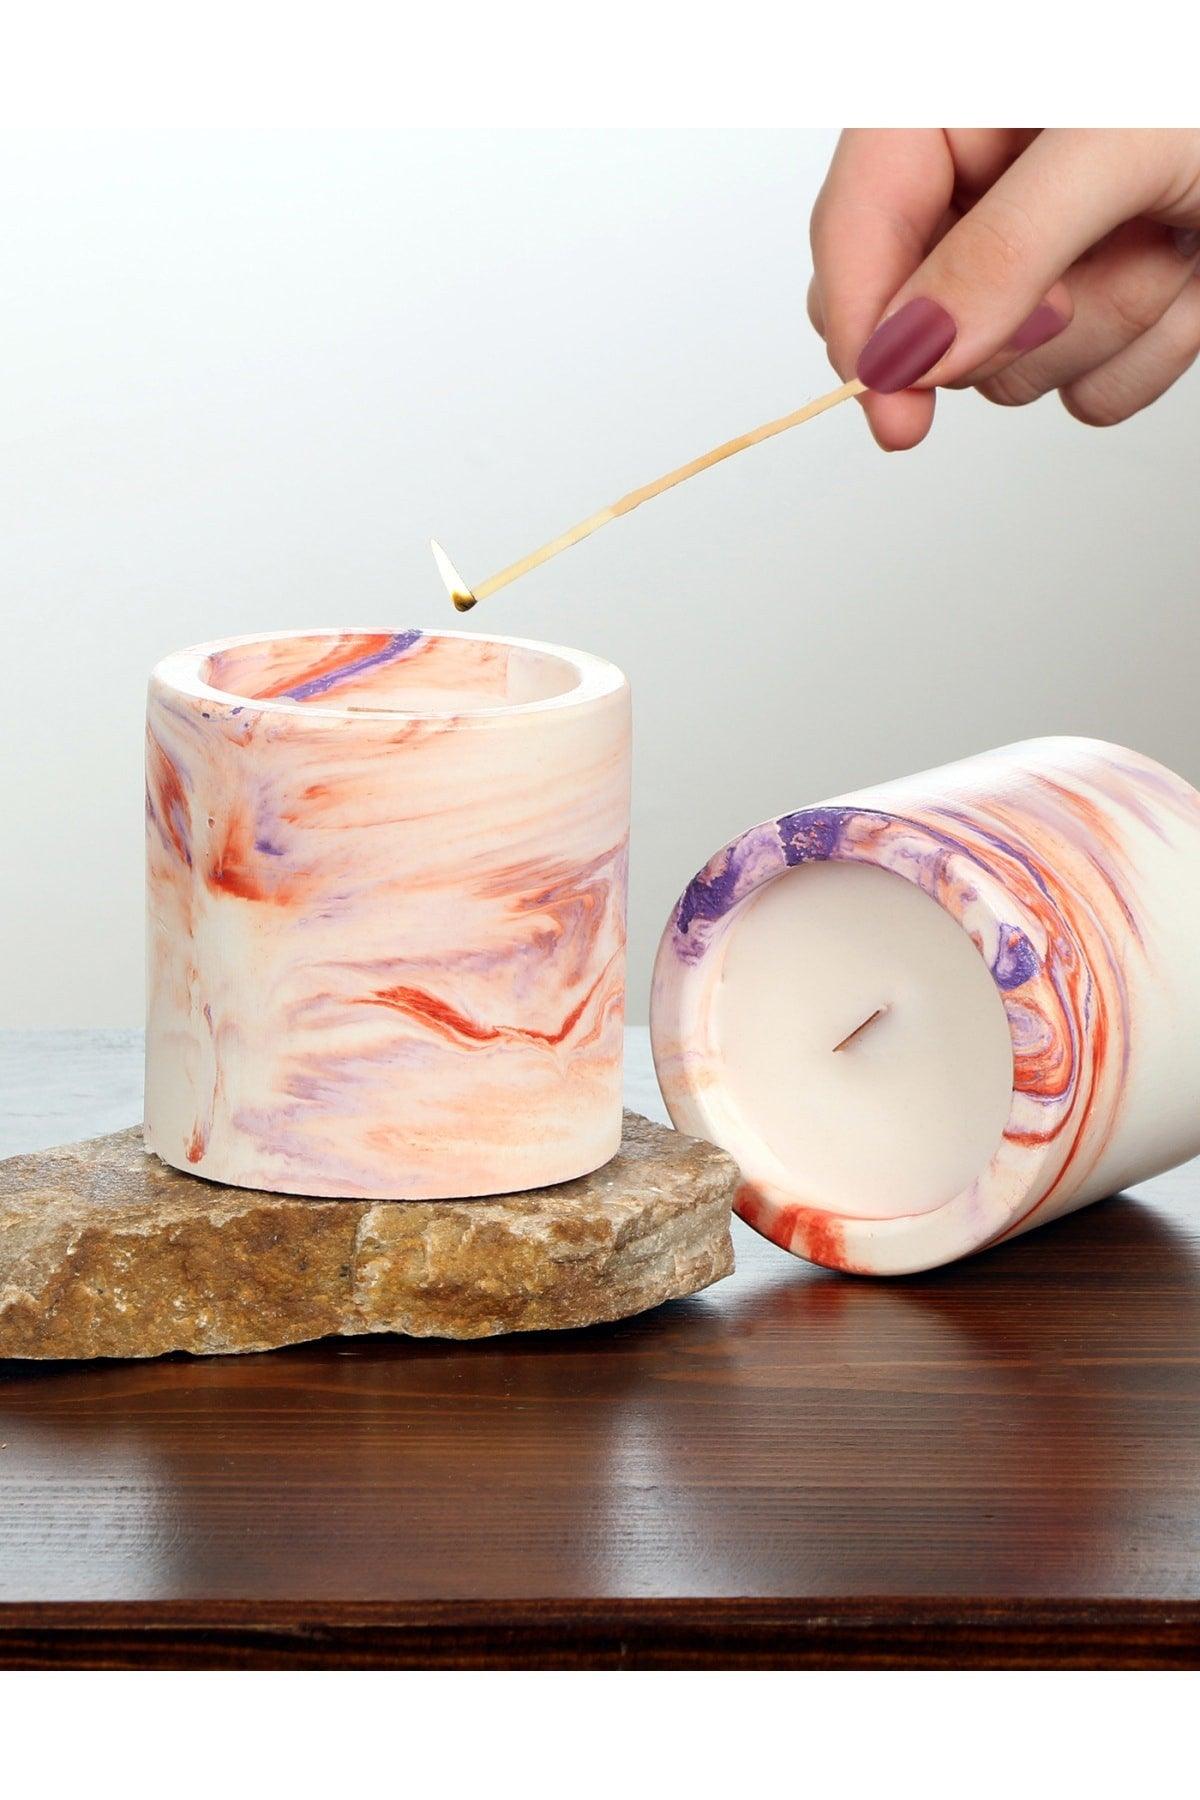 Decorative Orange-purple Marble Look Scented Concrete Candle , Soy Wax Bamboo Wick - Swordslife